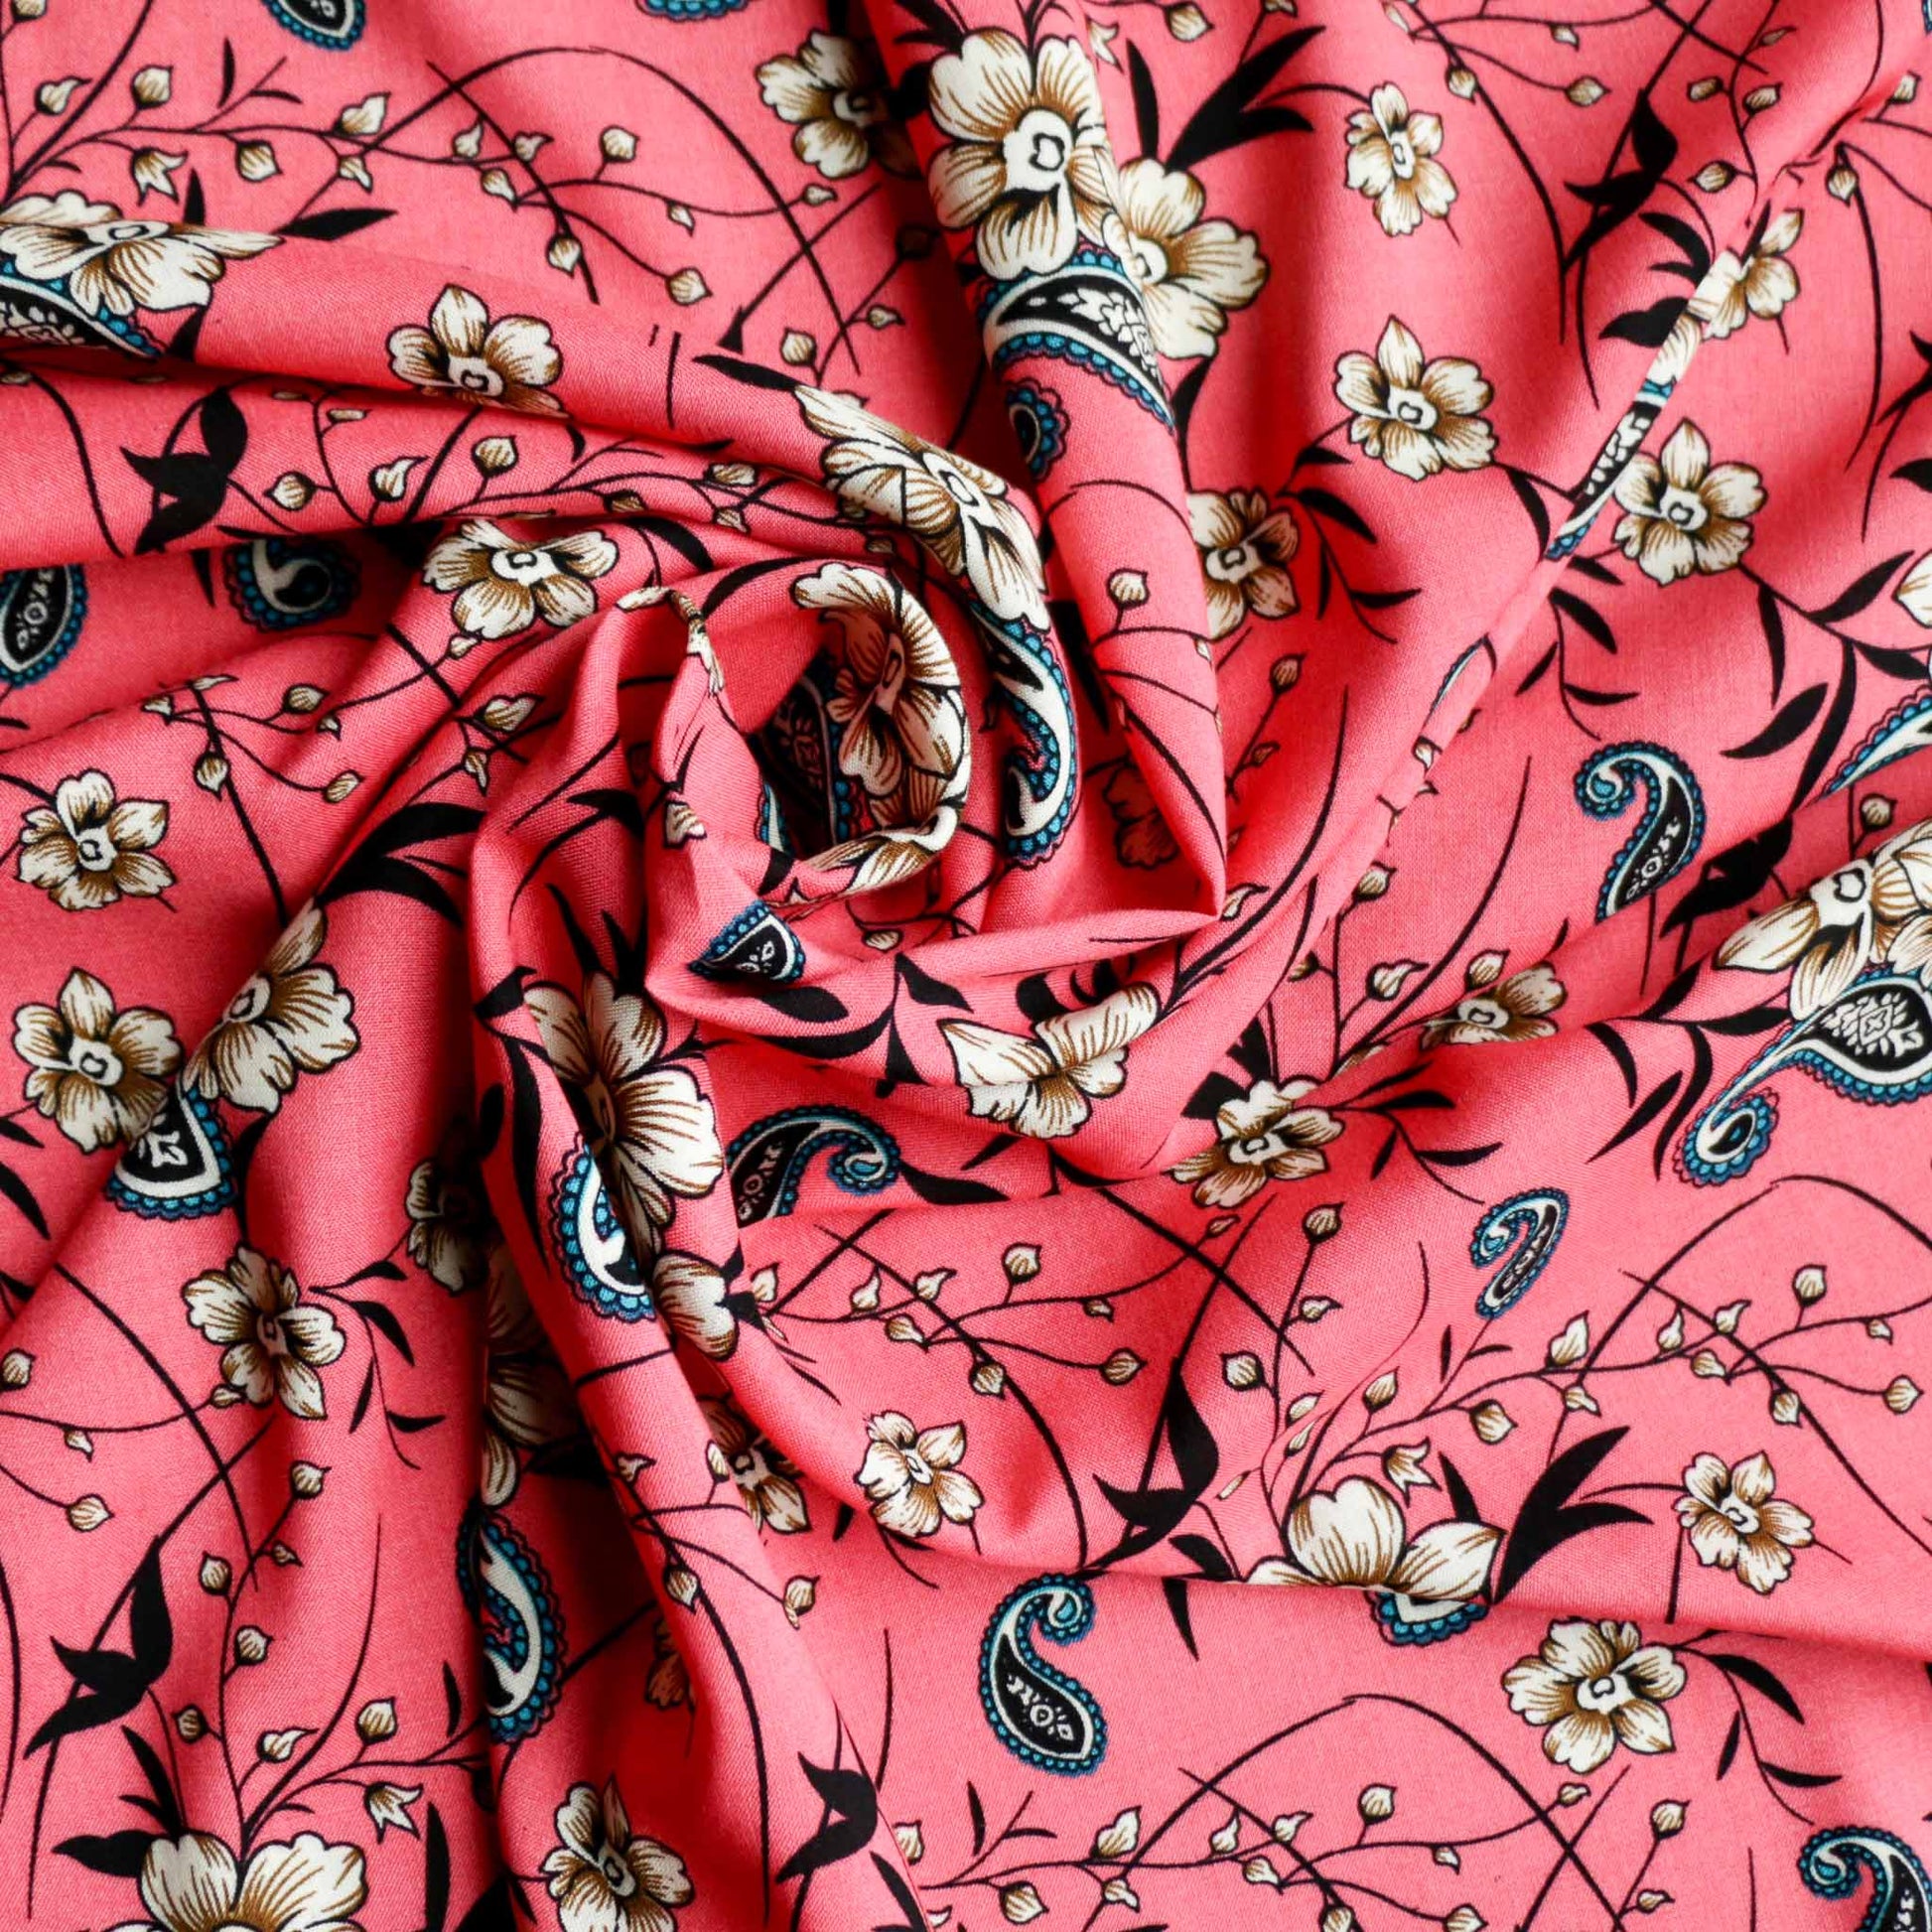 pink paisley inspired viscose challis dressmaking rayon fabric with floral design